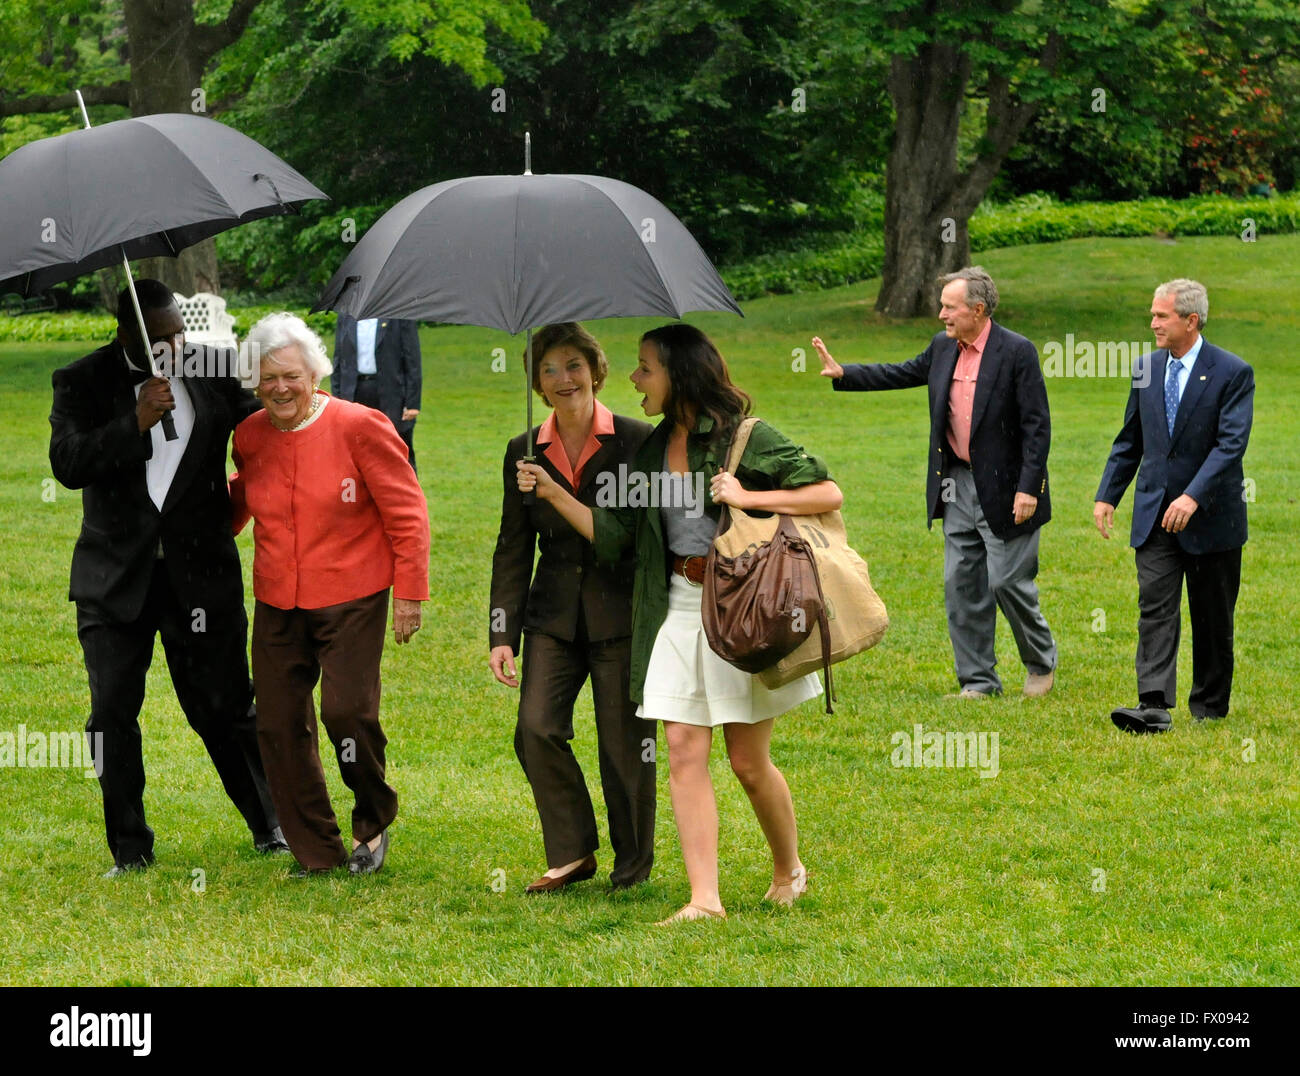 Former United States President George H.W. Bush (2nd, R) walks with US President George W. Bush as an aide assists former first lady Barbara Bush and first lady Laura Bush (C) walks with daughter Barbara, as they arrive at the White House from a weekend at the Crawford, Texas ranch, 11 May 2008 in Washington, DC. Bush, whose daughter Jenna married Henry Hager at the ranch, described the experience as 'spectacular' and 'it's all we could have hoped for'. Credit: Mike Theiler/Pool via CNP - NO WIRE SERVICE - Stock Photo